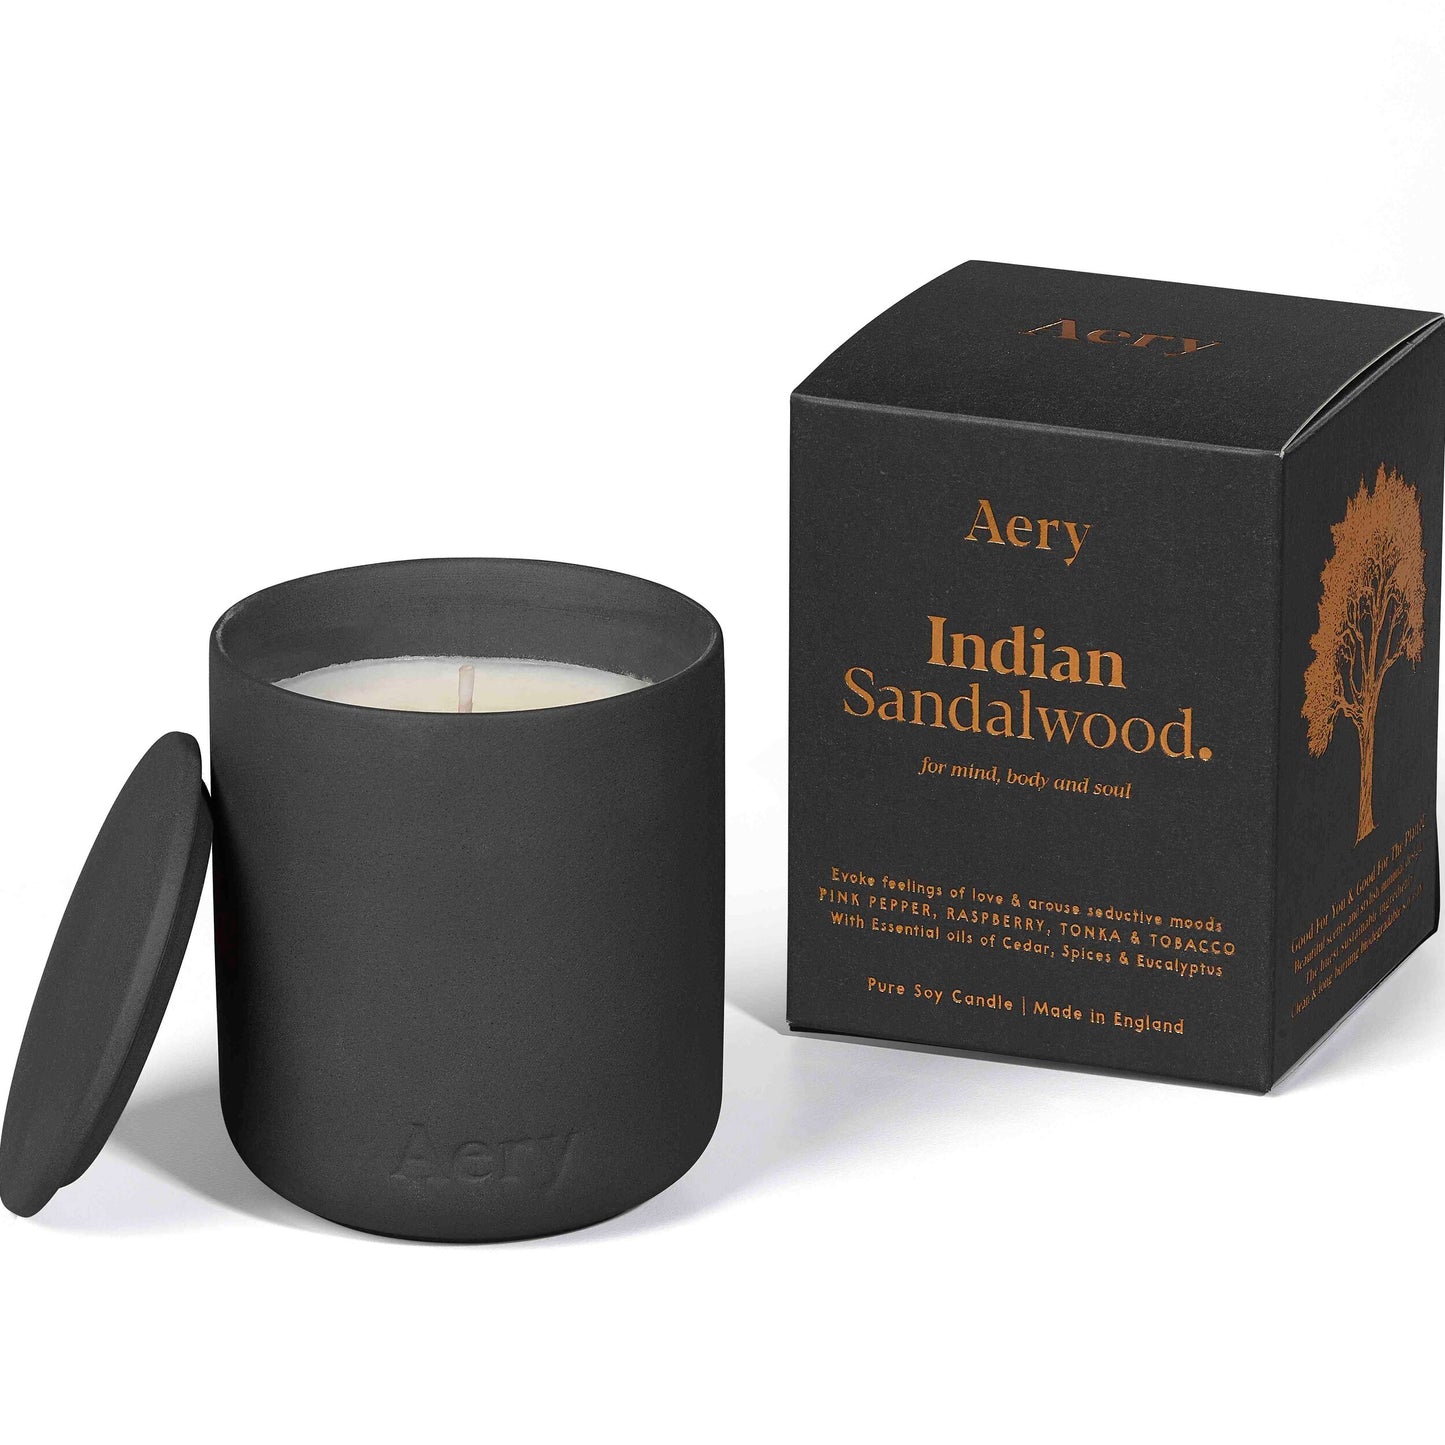 Indian Sandalwood Scented Plant Based Wax candle In A Reusable Clay Pot - The Bristol Artisan Handmade Sustainable Gifts and Homewares.